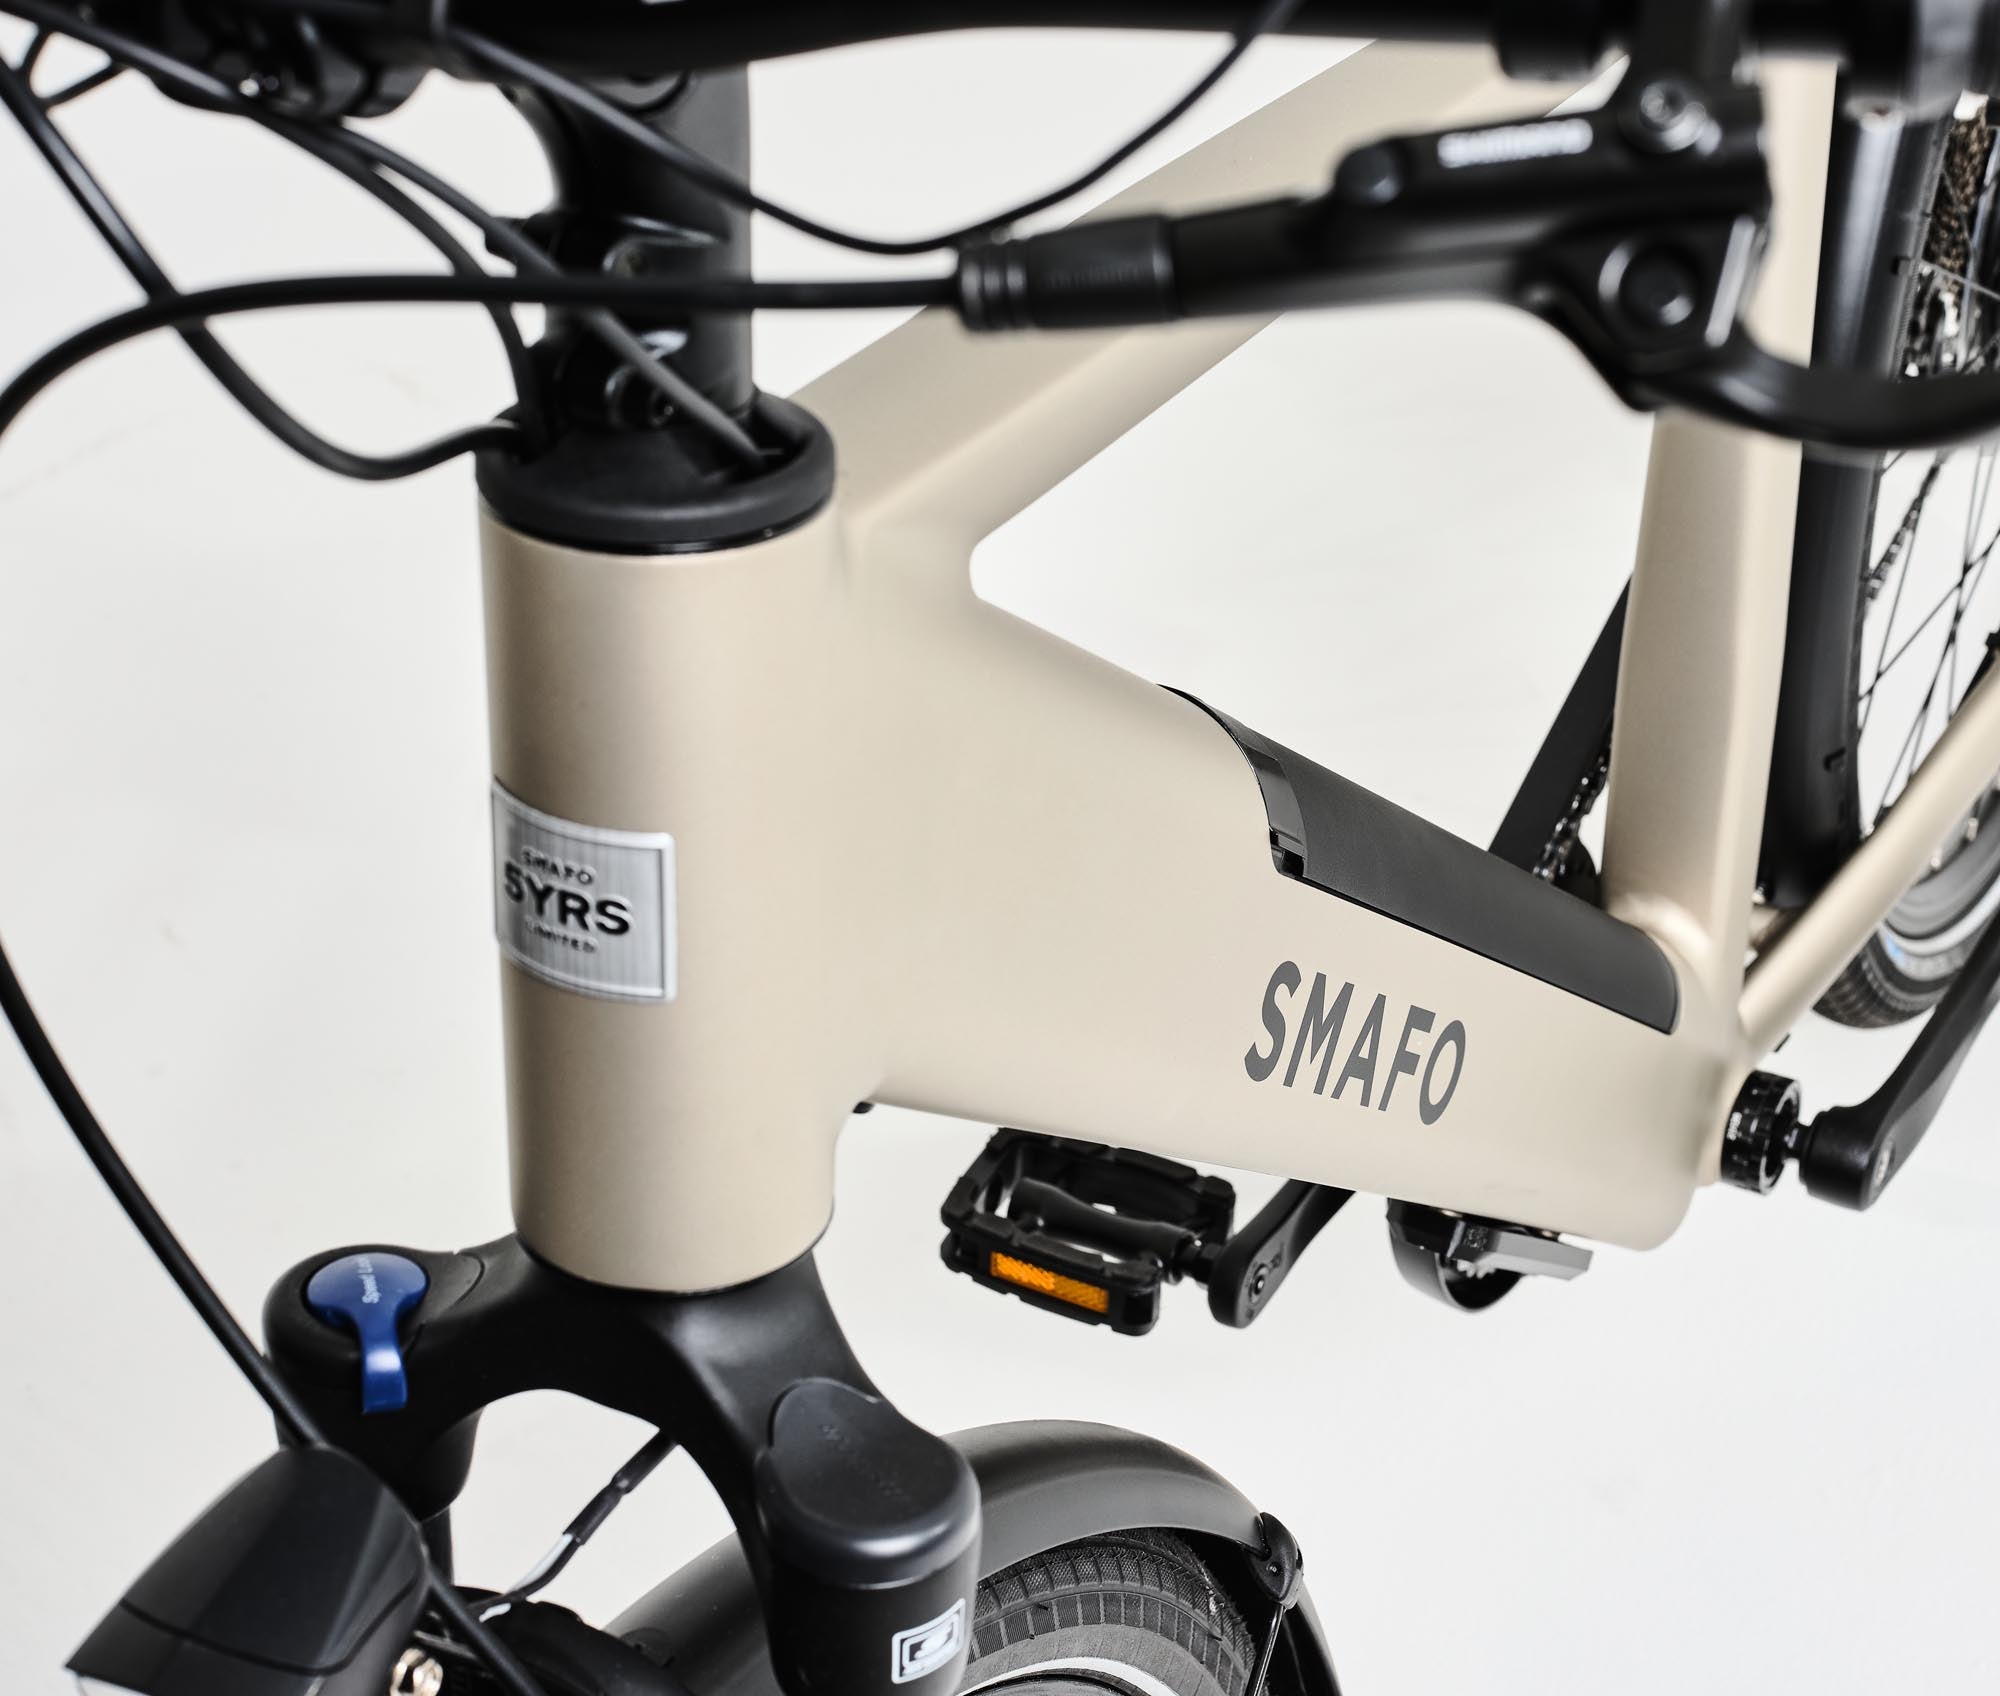 SMAFO 4 limited